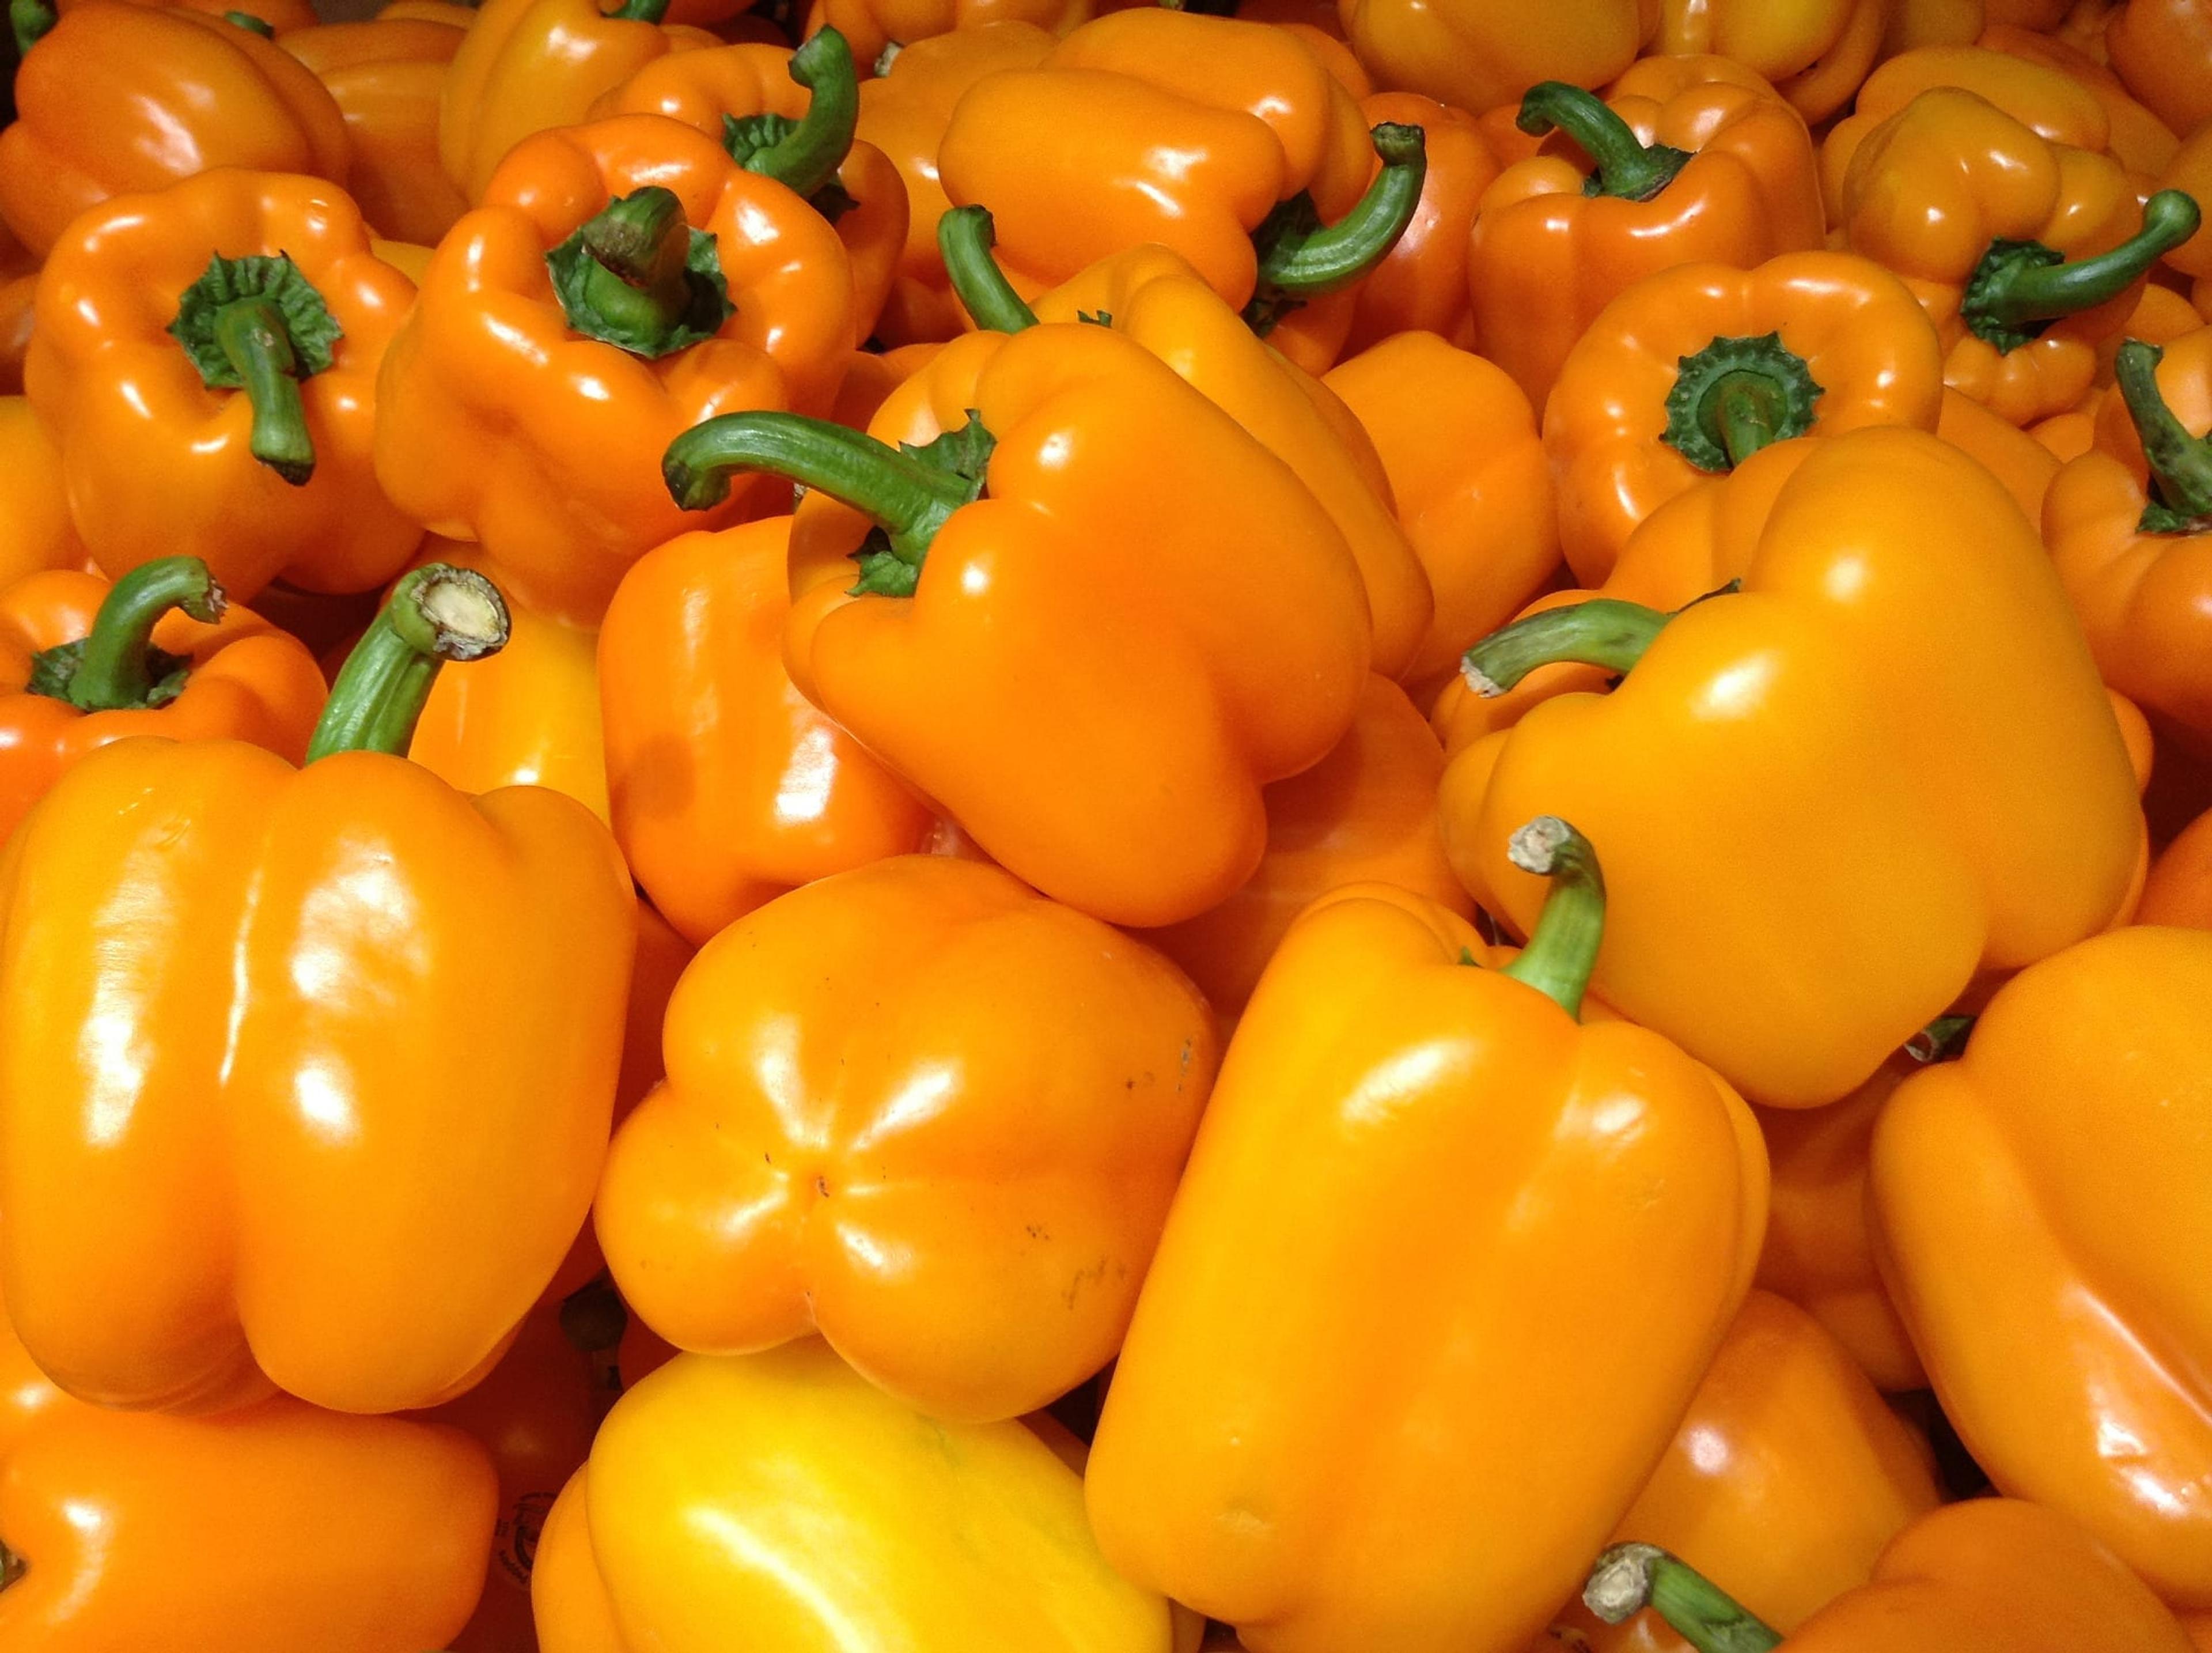 Image of orange bell peppers